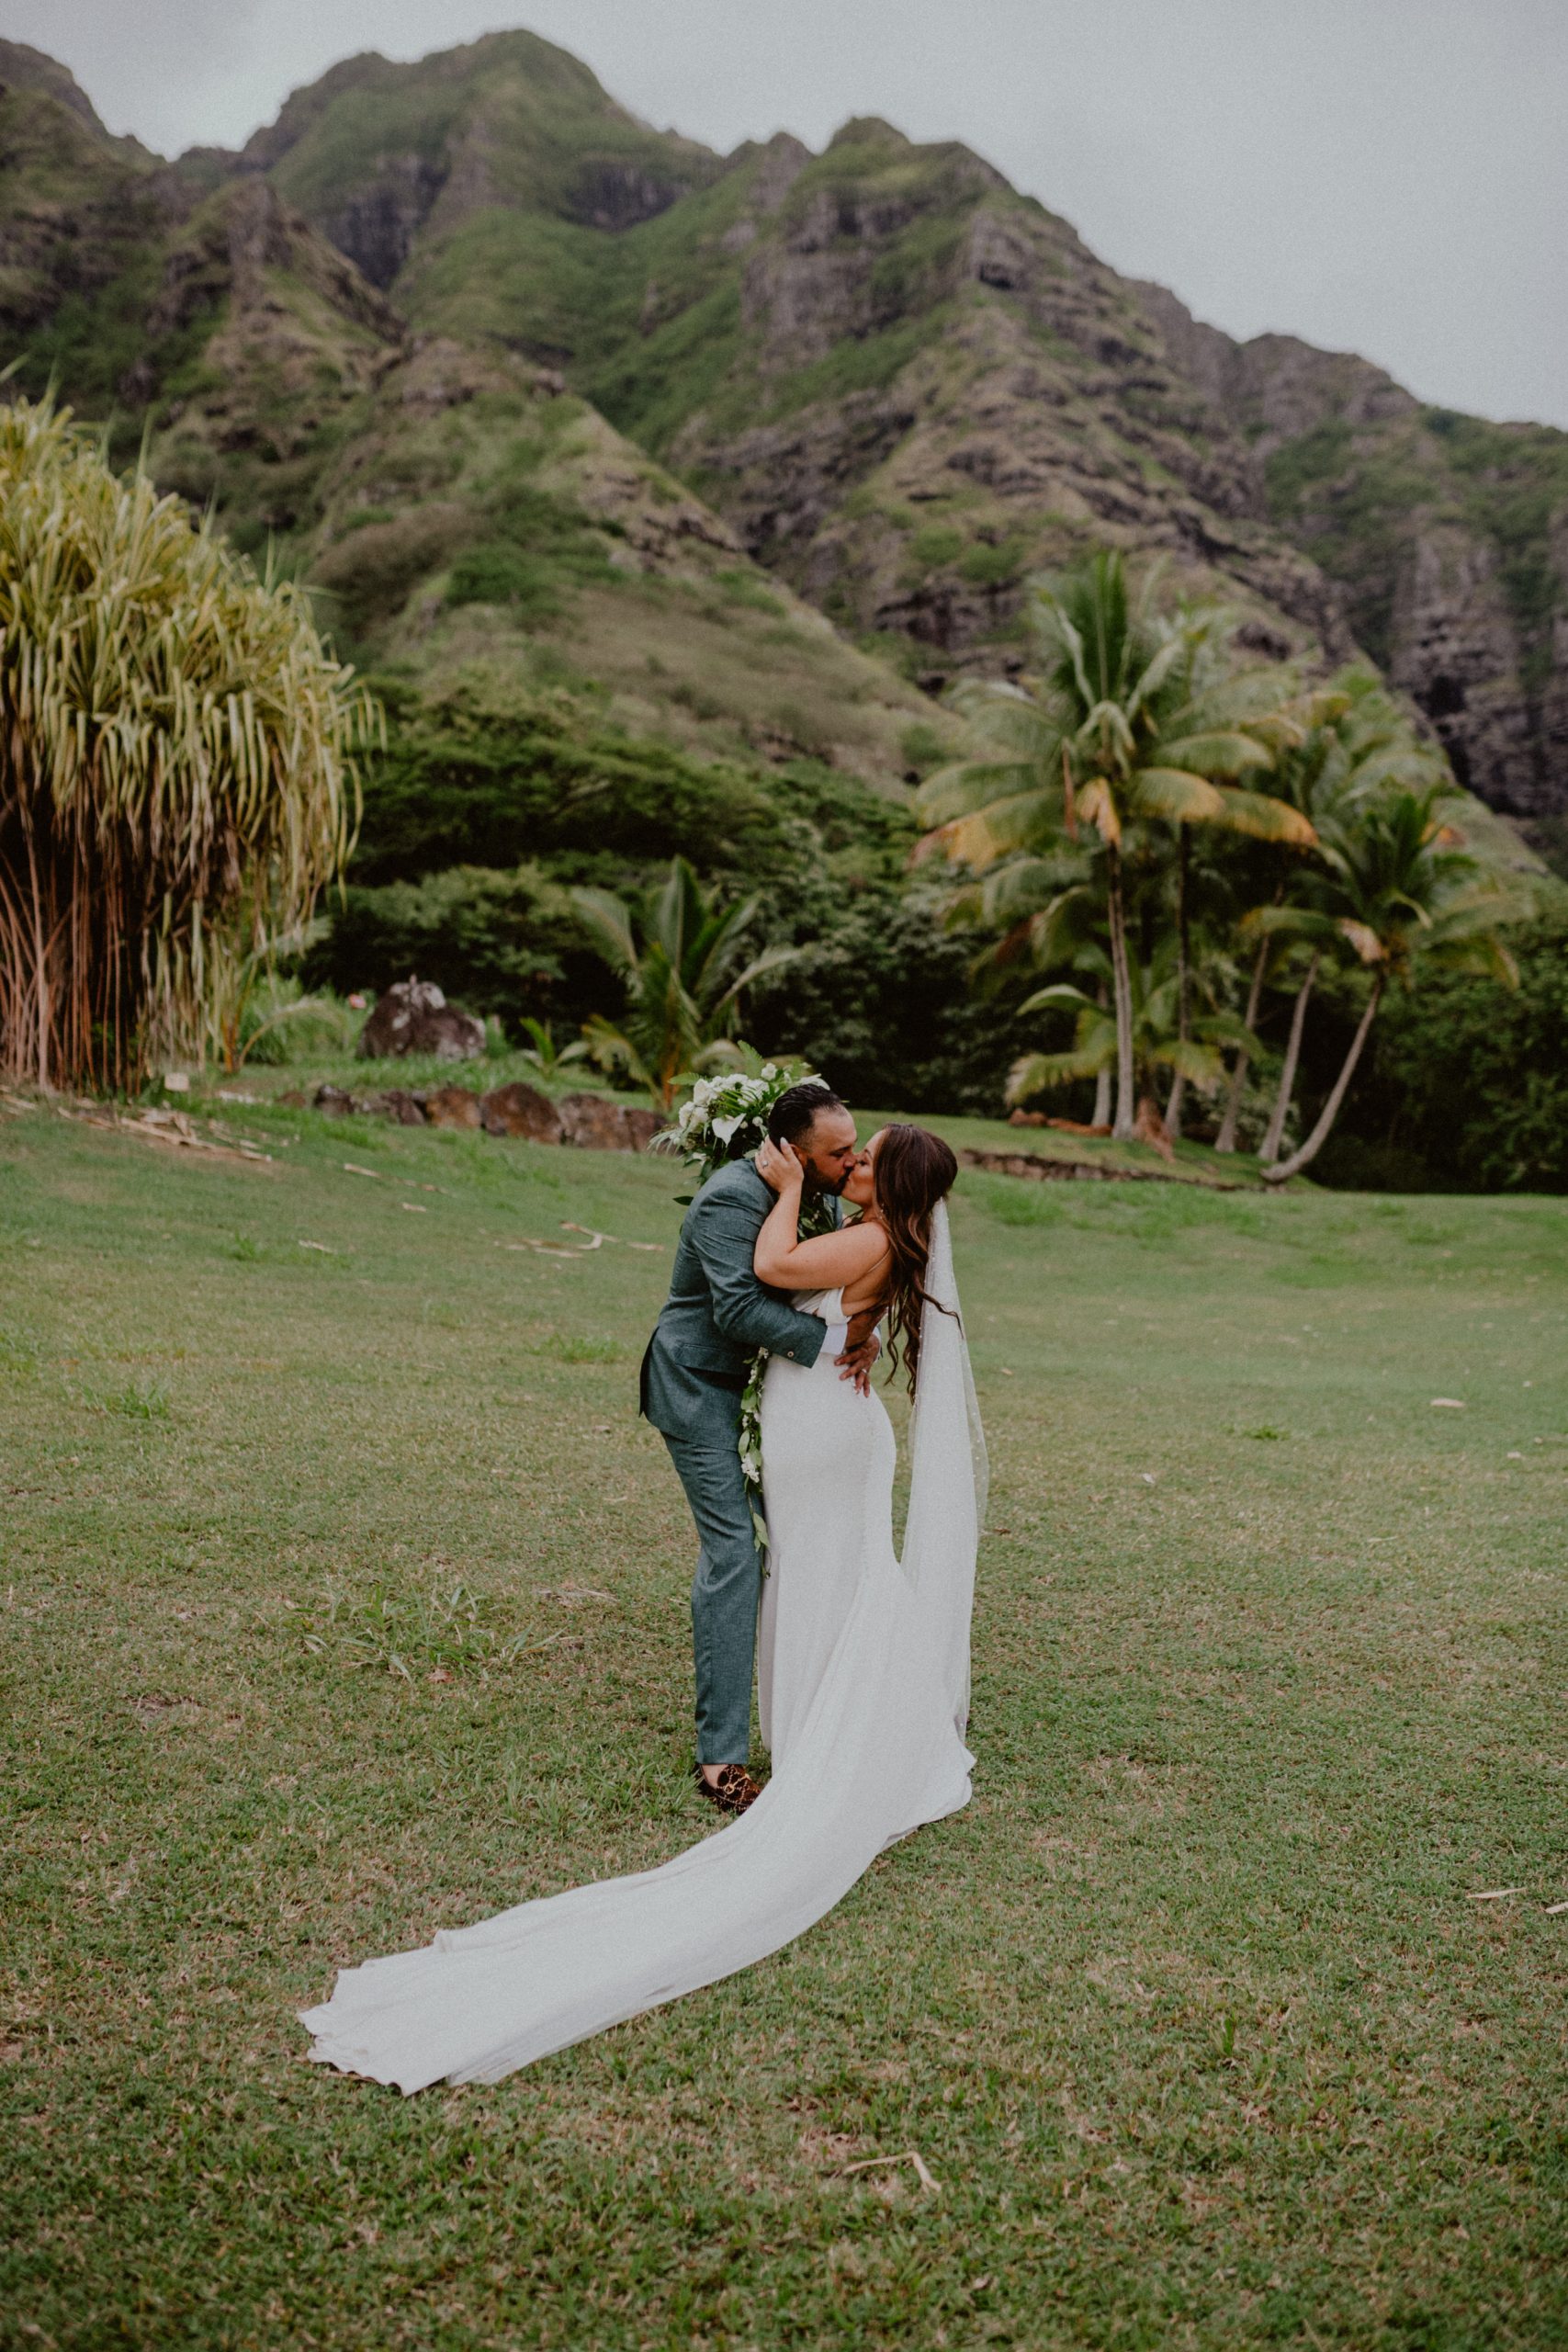 Bride and Groom kiss after their Kualoa Ranch Wedding in front of the mountains in Oahu | Oahu Wedding Photographer, Oahu Elopement Photographer, Destination Wedding Photographer, Destination Elopement Photographer, Newlywed moments ideas, Newlywed Photography inspiration, Hawaii Elopement ideas | chelseaabril.com